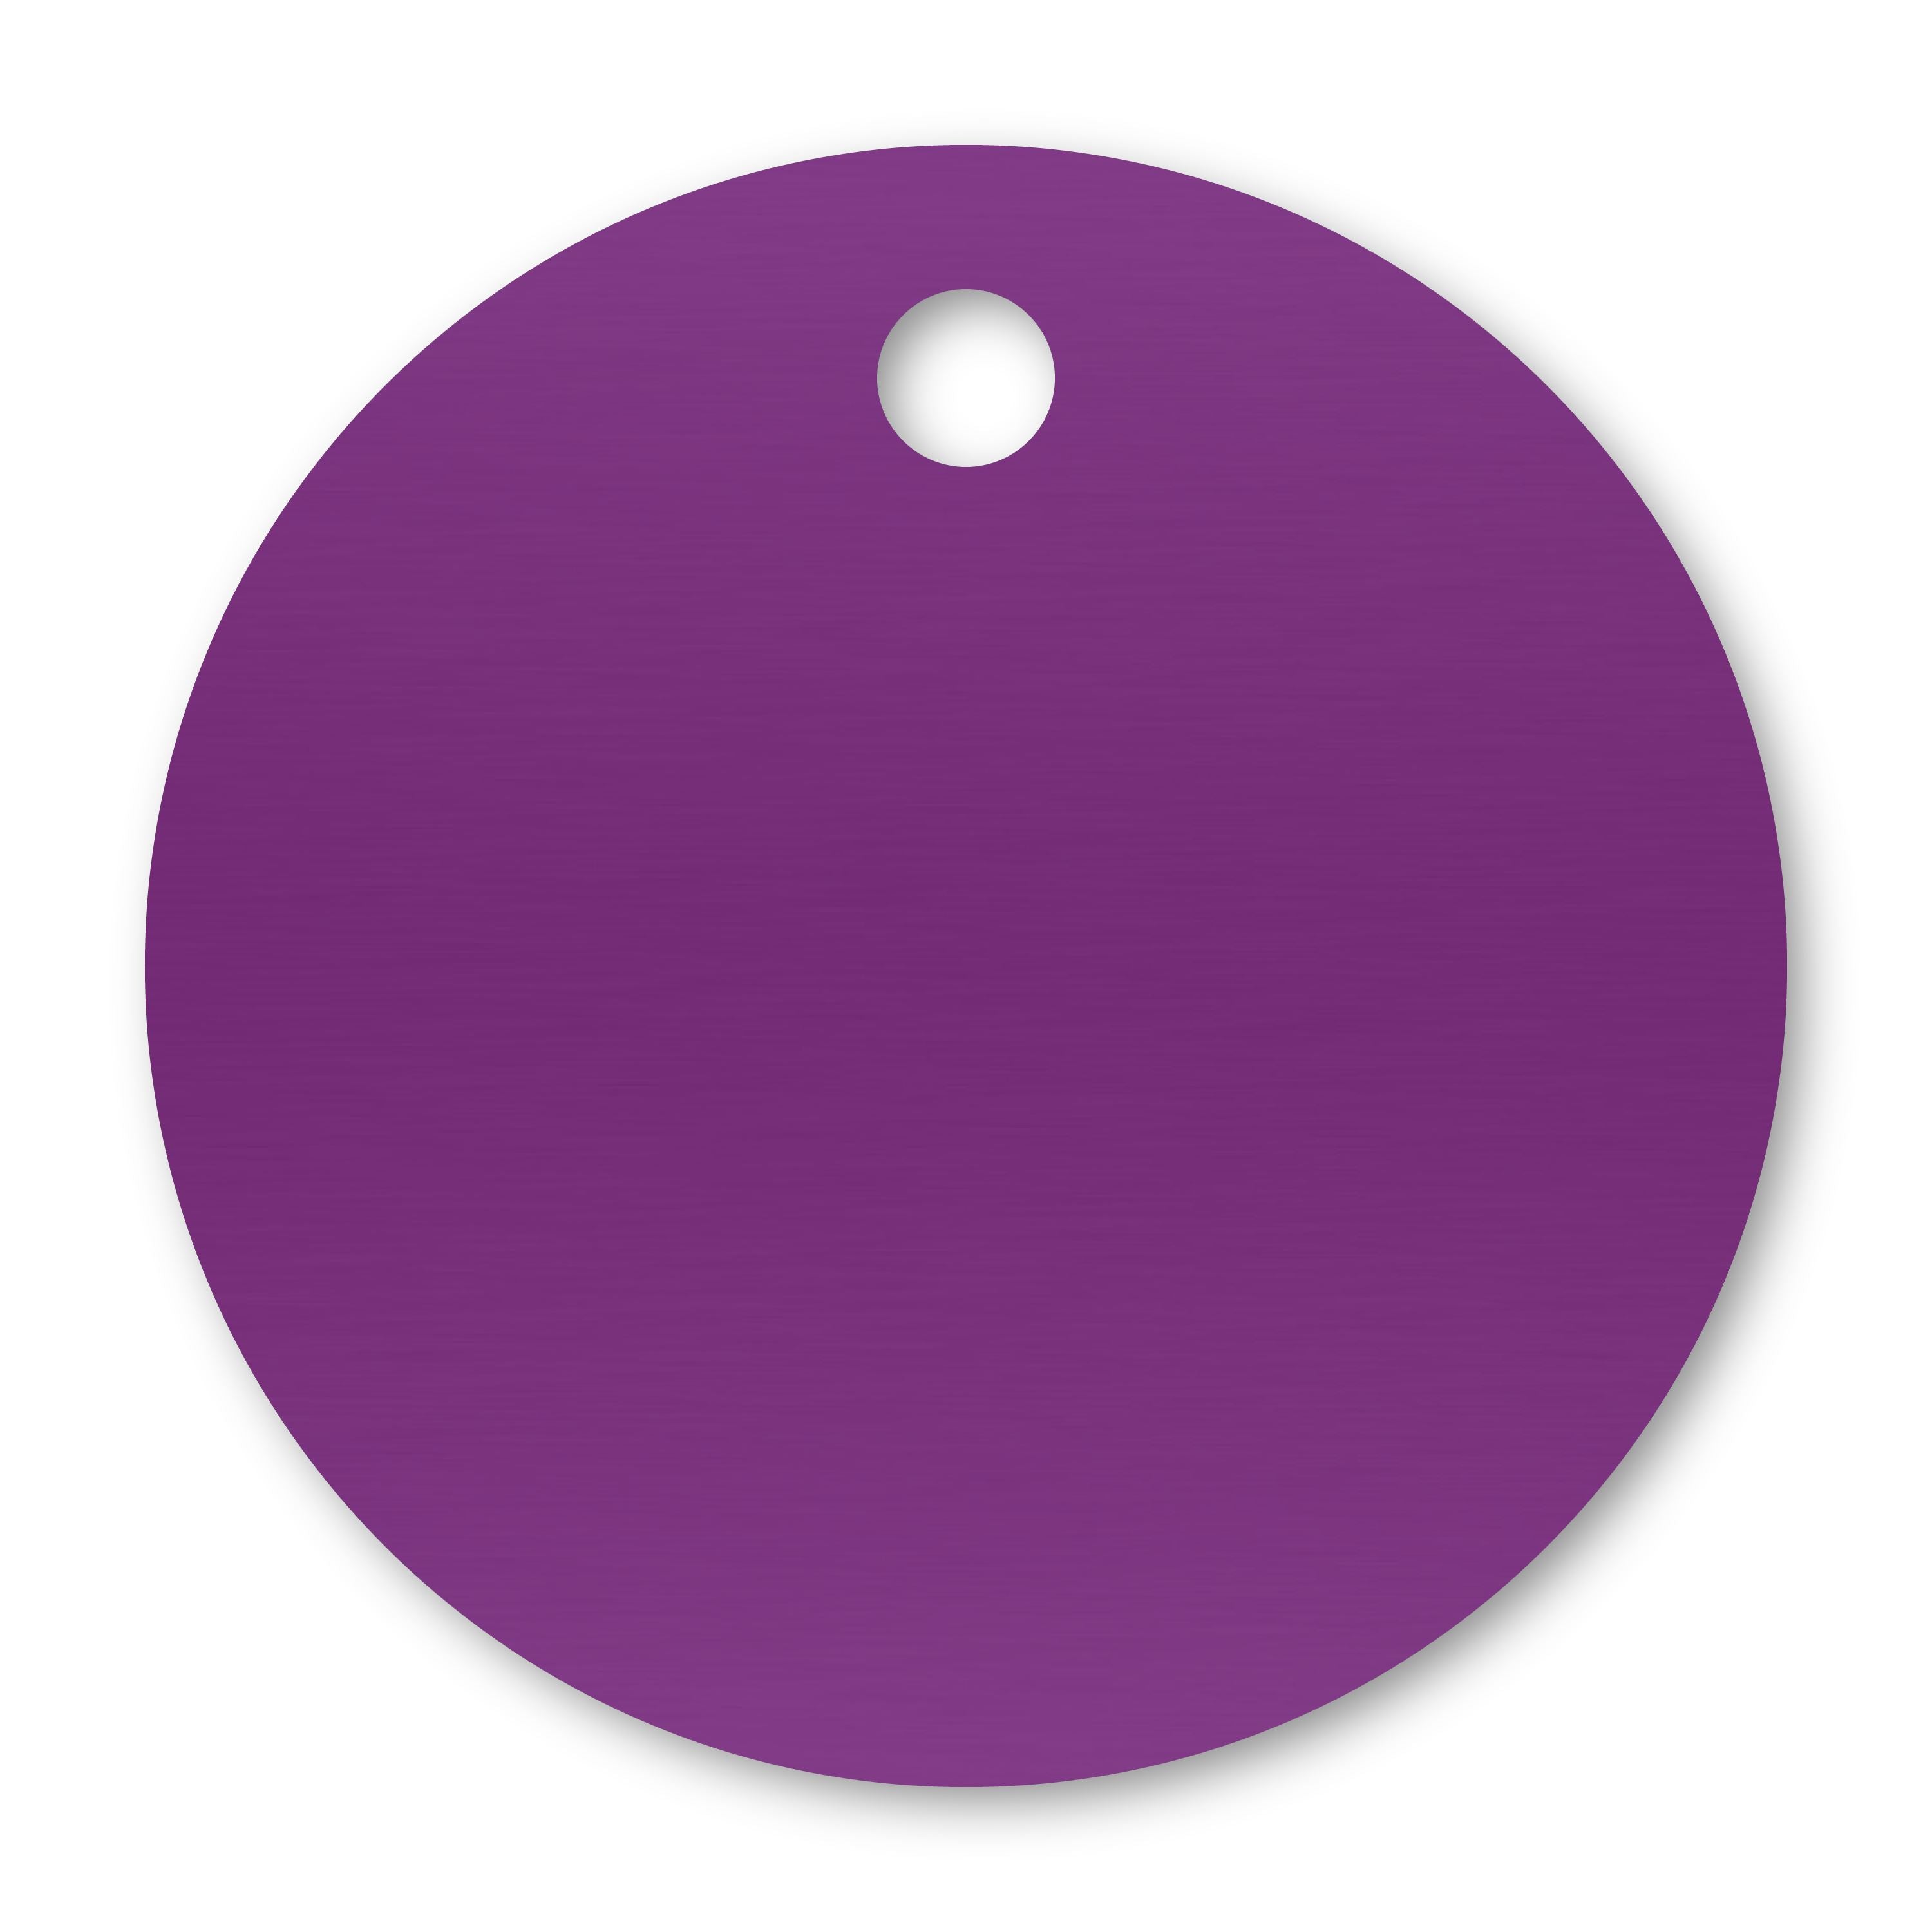 Anodized Aluminum Round Tags, 1" with 1/8" Hole, Laser Engraved Metal Tags Craftworks NW Purple 